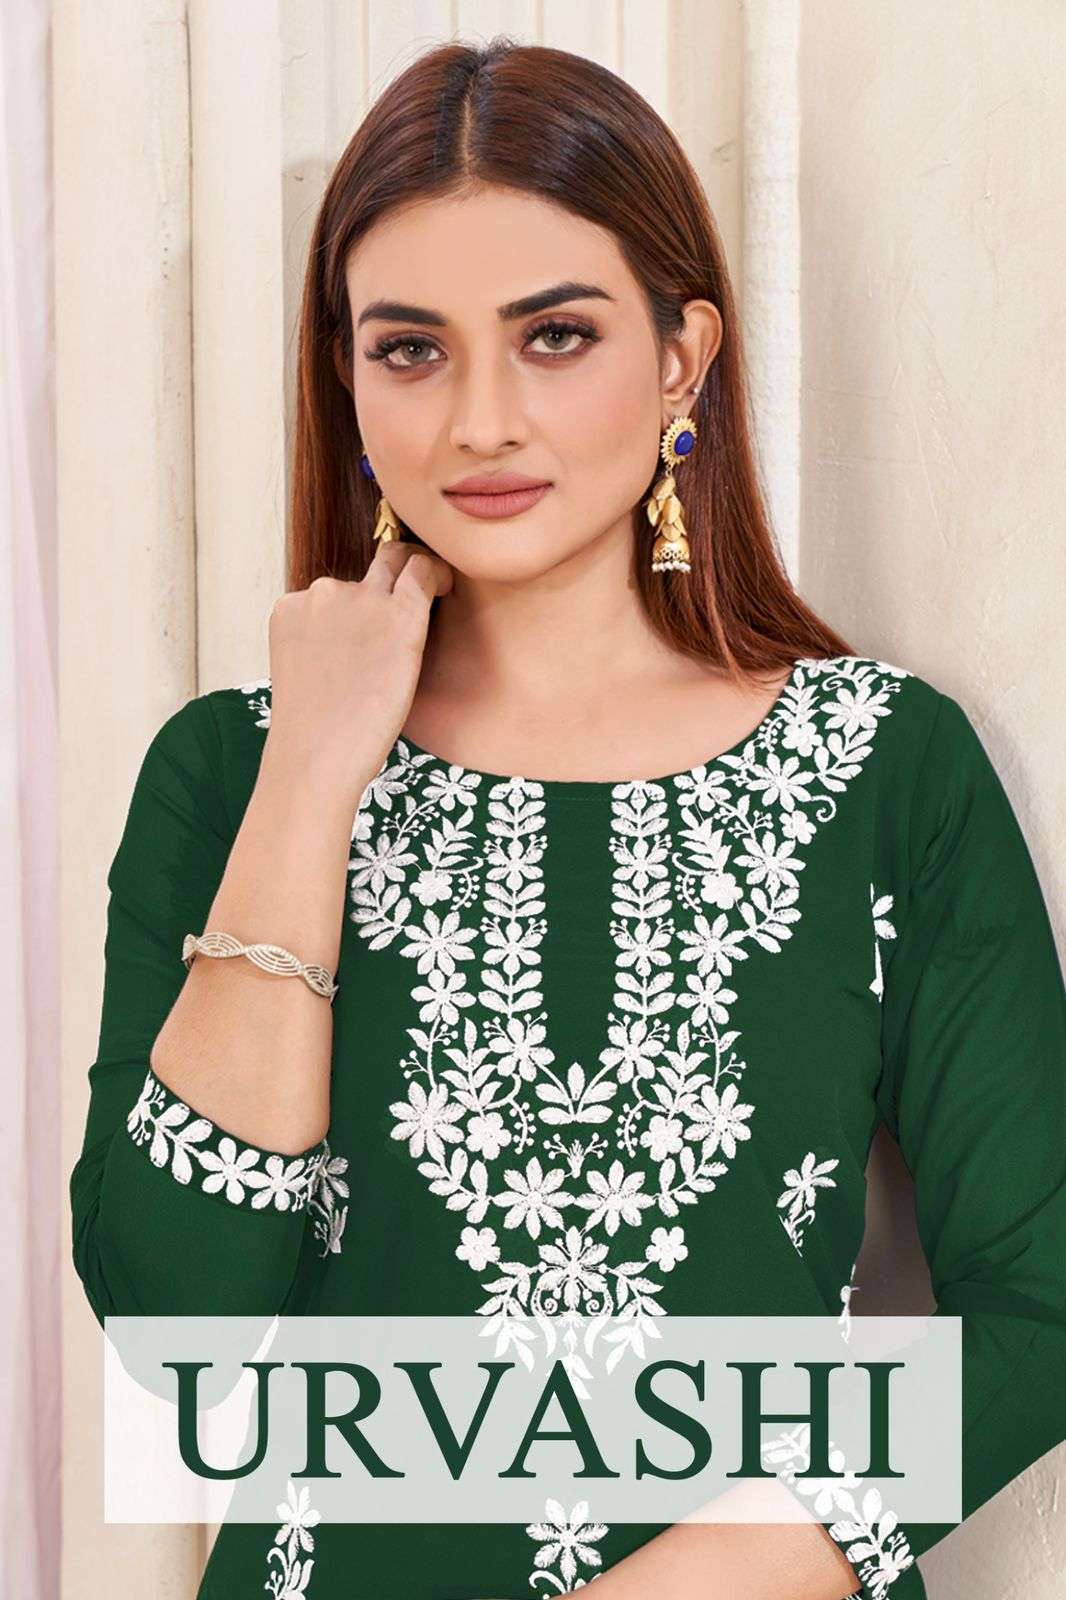 URVASHI HEAVY BOMBAY RAYON WHITE COTTON EMBROIDERY WORK KURTI BT S3FOREVER BRAND WHOLESALER AND DEAL...